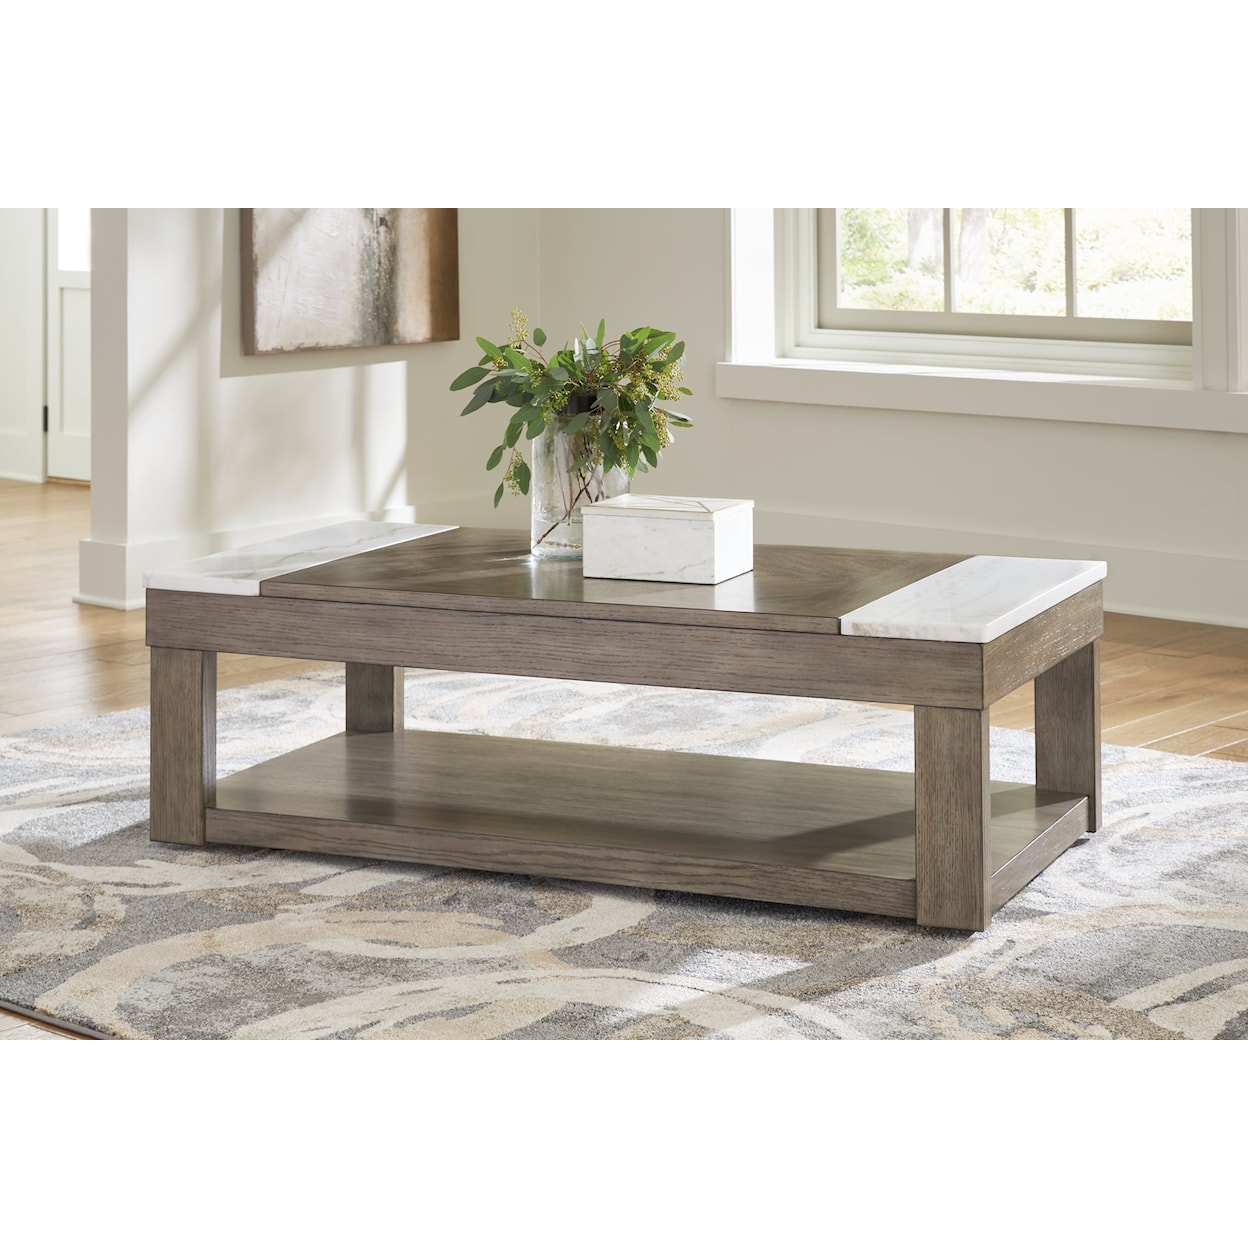 Signature Design by Ashley Loyaska Lift-top Coffee Table and 2 End Tables